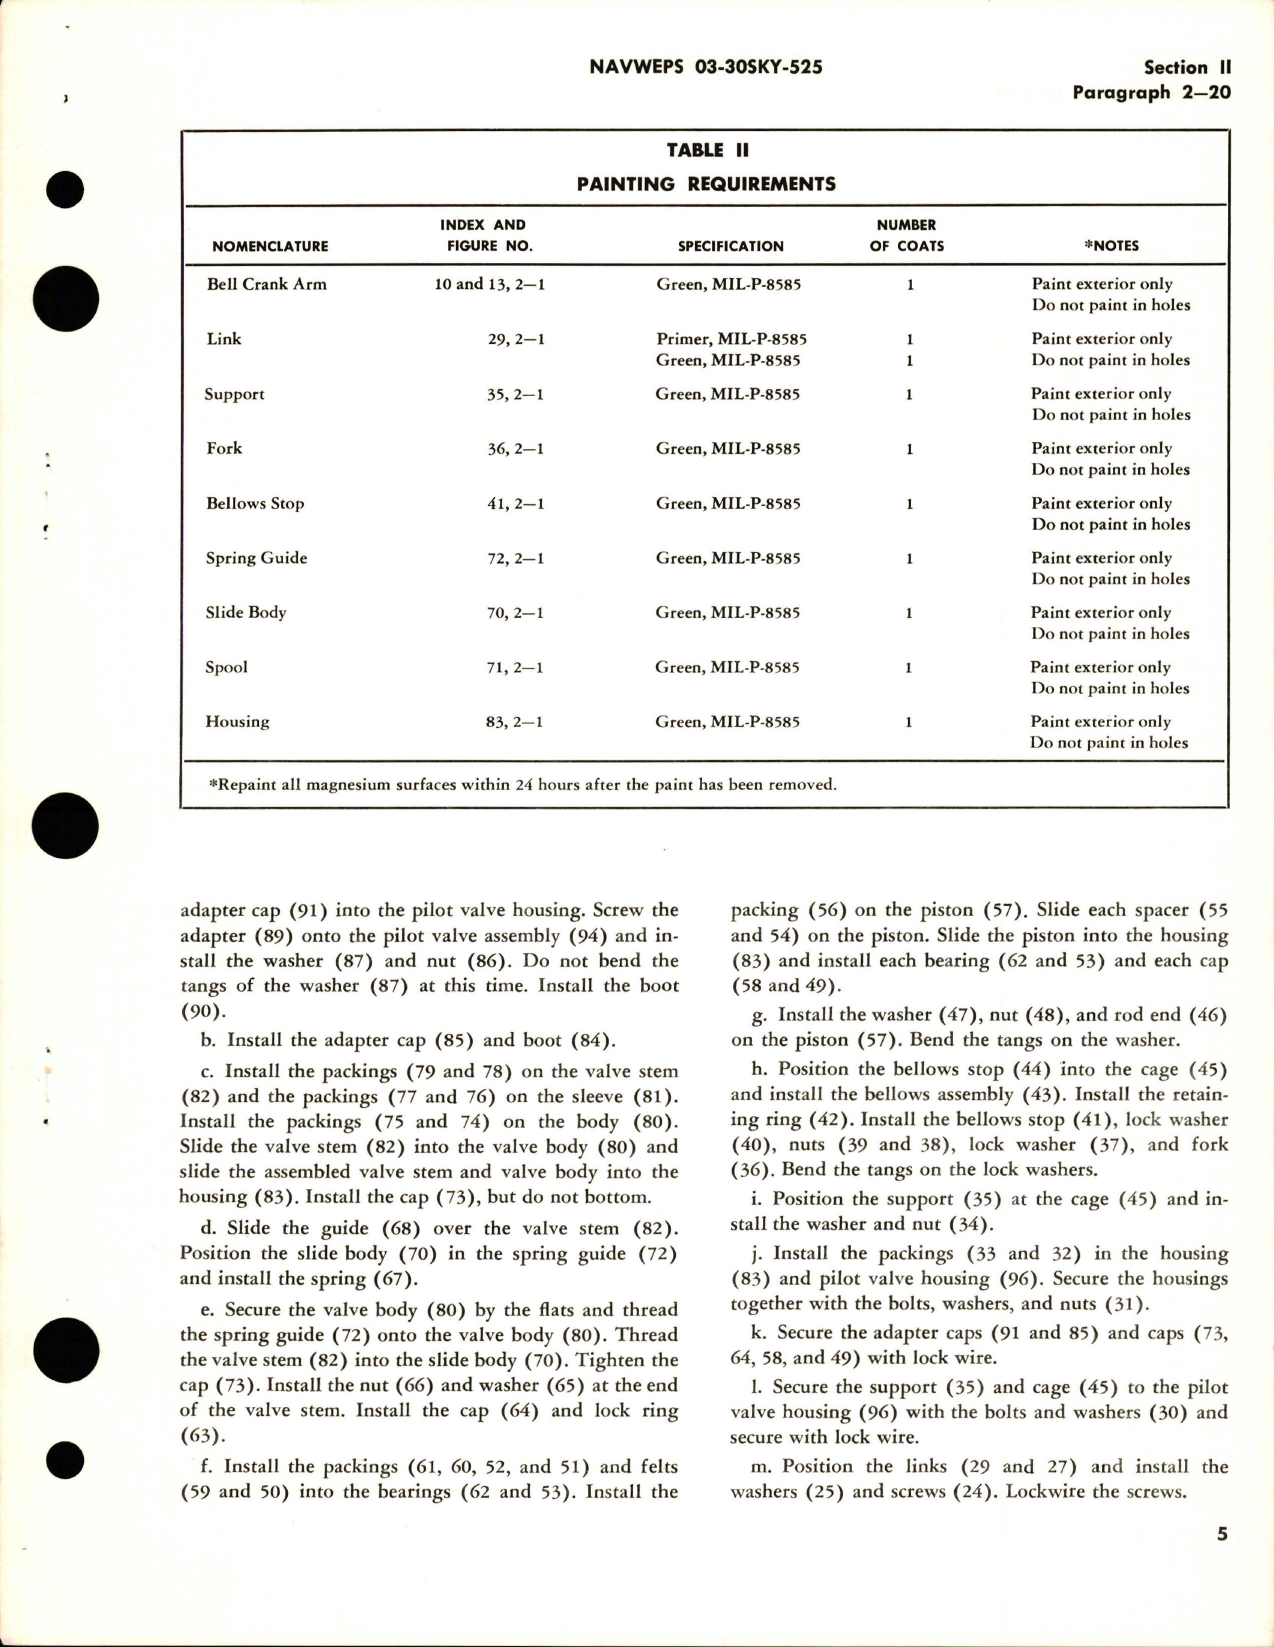 Sample page 7 from AirCorps Library document: Overhaul Instructions for Tail Rotor Servo Unit Assembly - Part S14-40-5144 